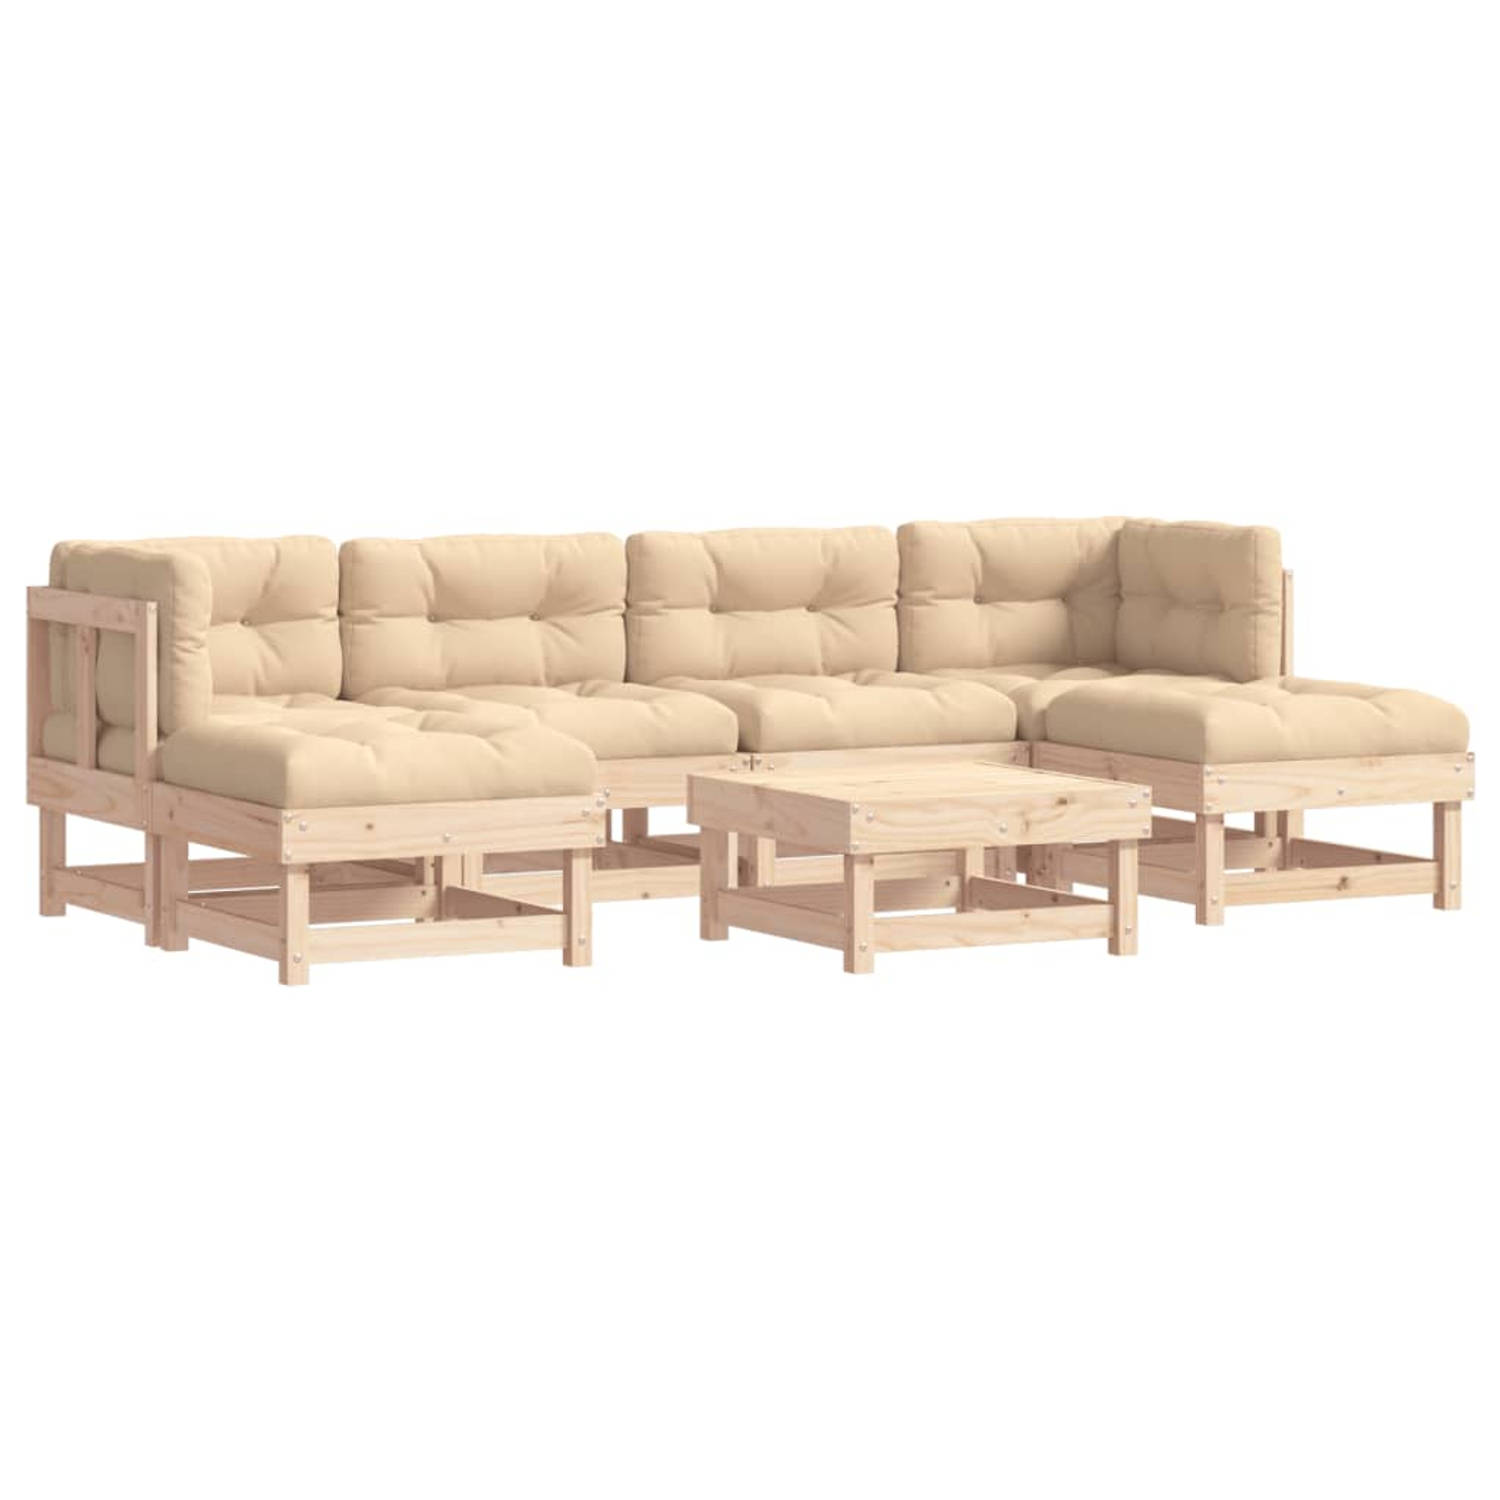 The Living Store Loungeset - Grenenhout - Modulair - Beige - 110 kg